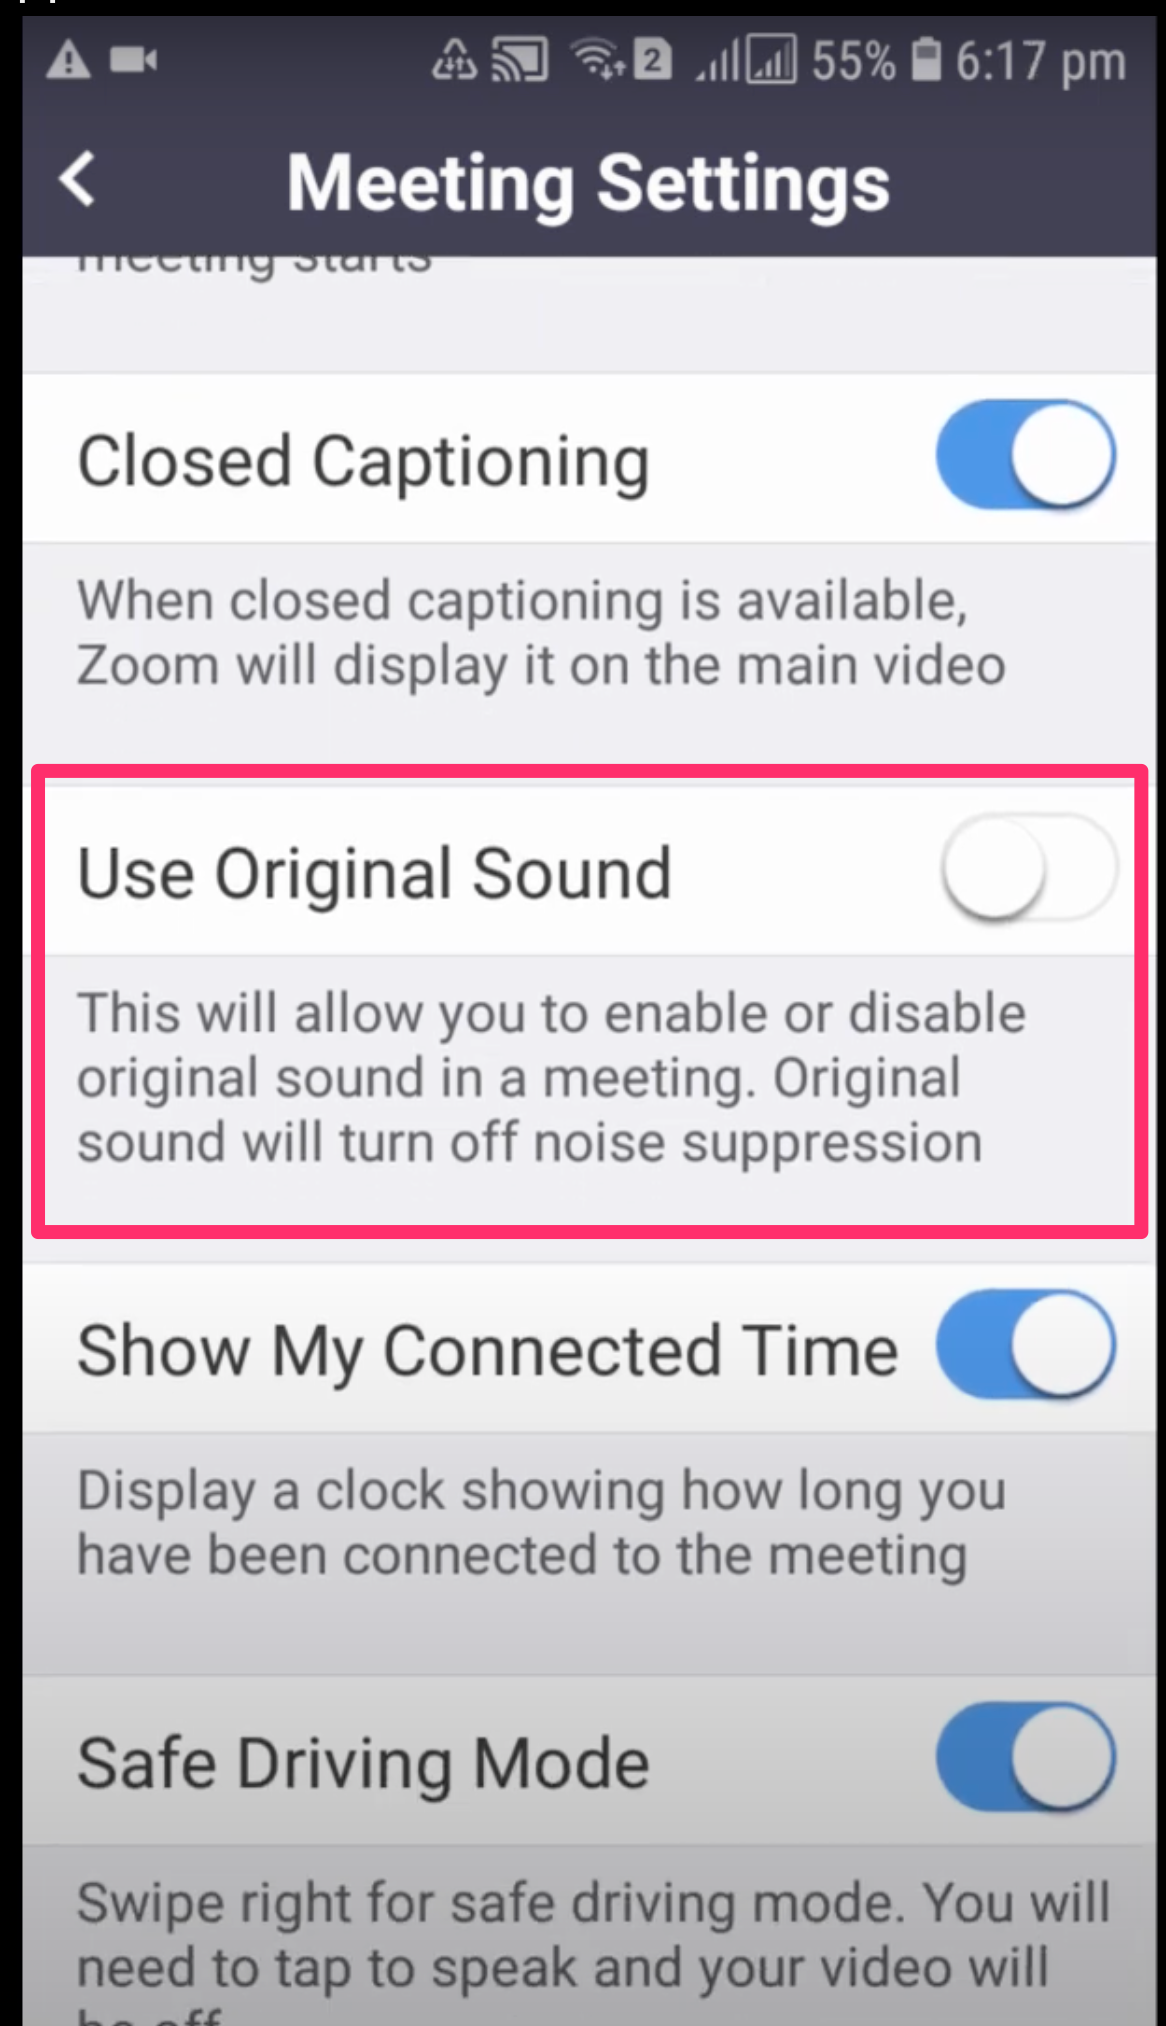 Screenshot of the Meeting Settings where you can enable Use Original Sound